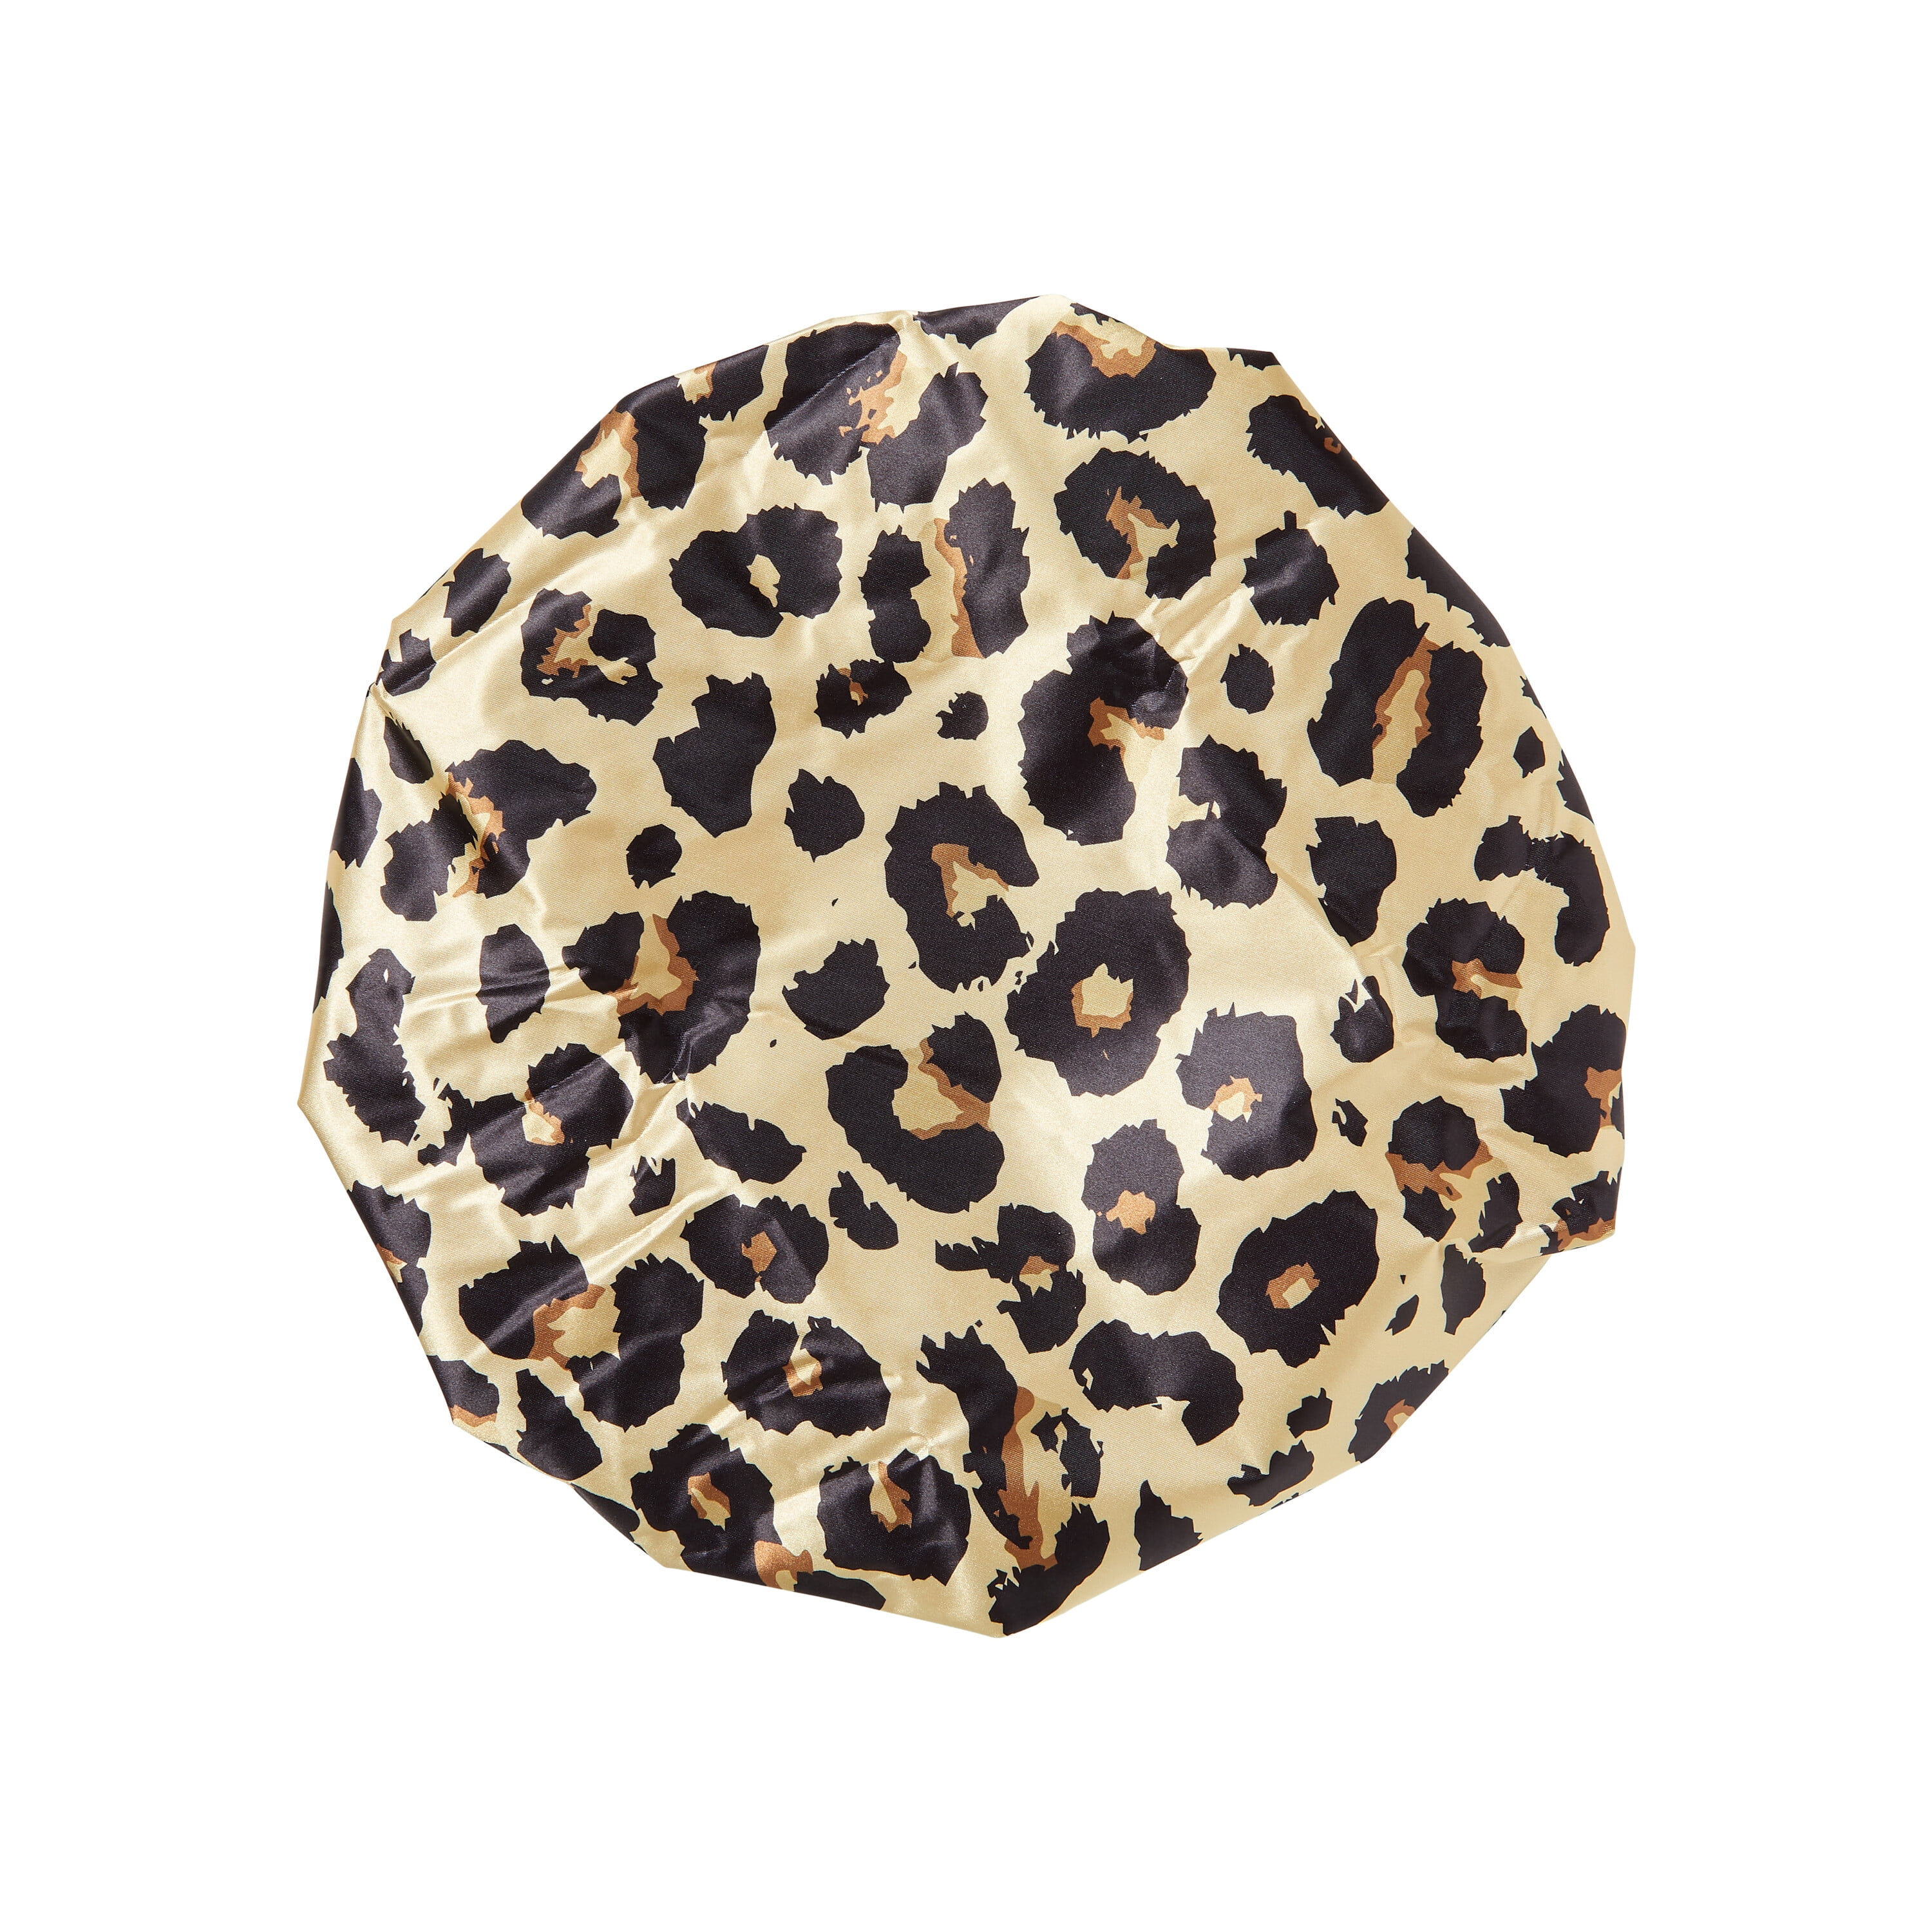  3Pcs Leopard Print Heart Silicone Straw Cover Cap for